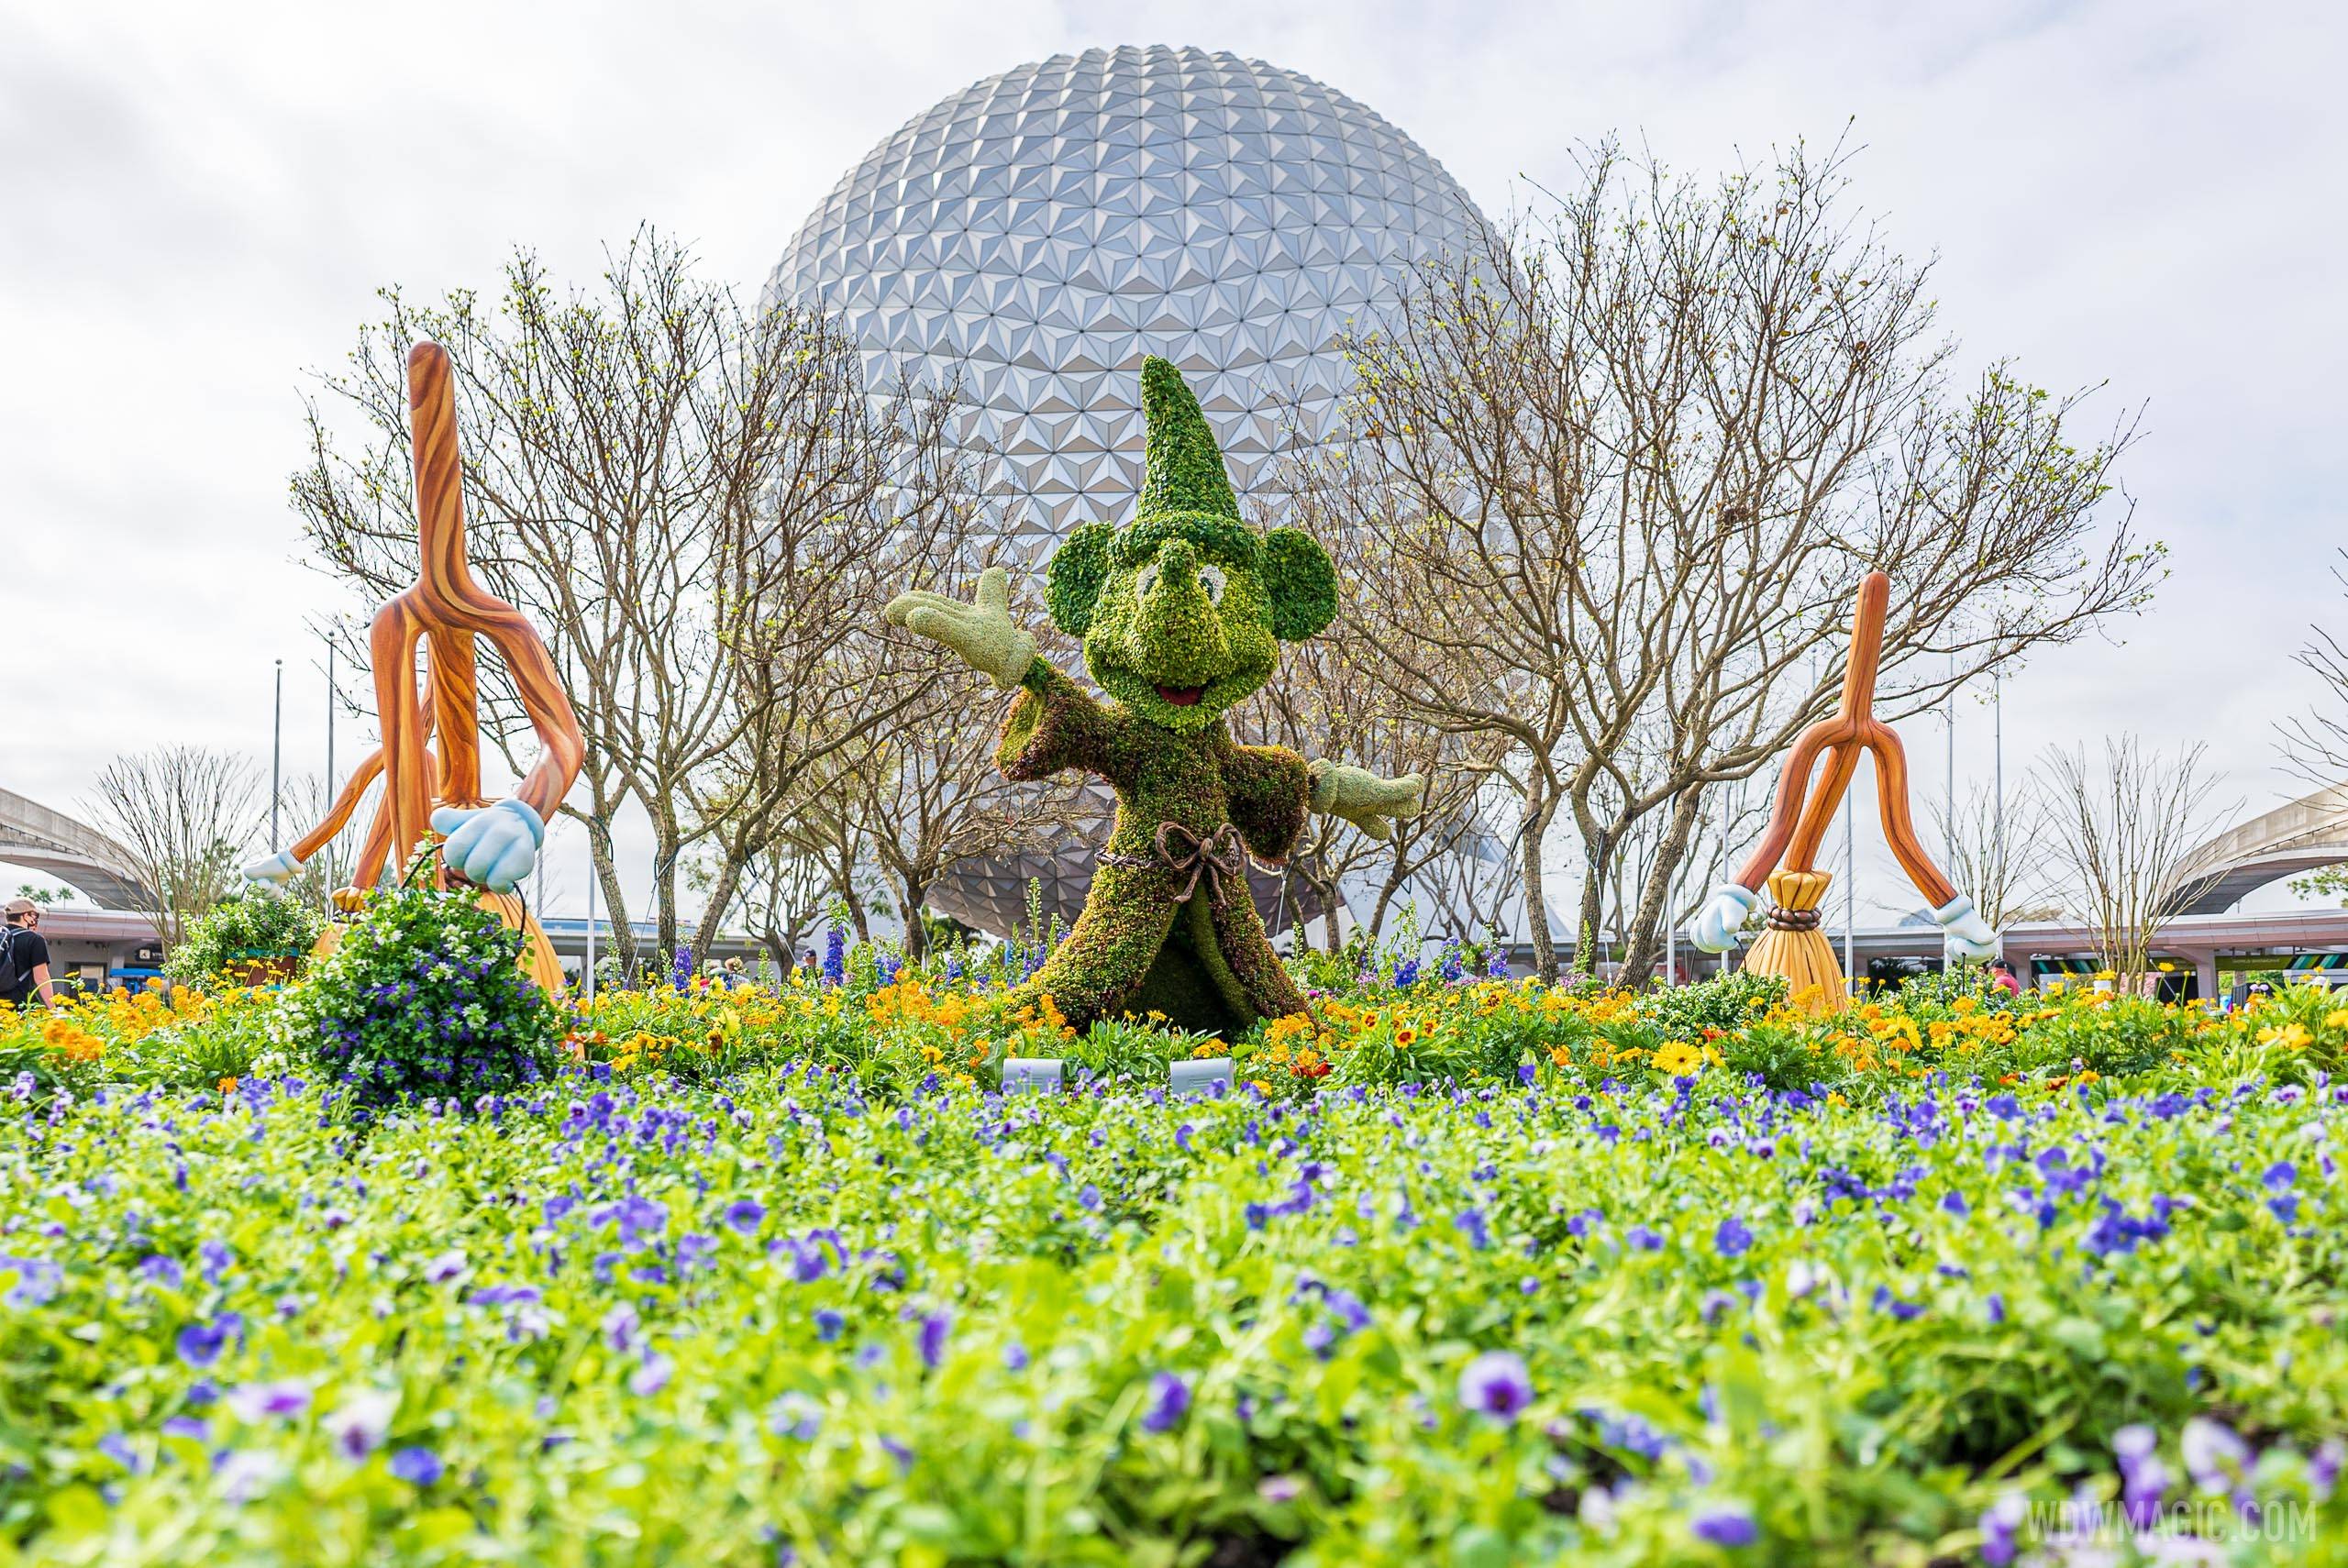 PHOTOS - EPCOT main entrance topiary arrive as part of the Flower and Garden Festival